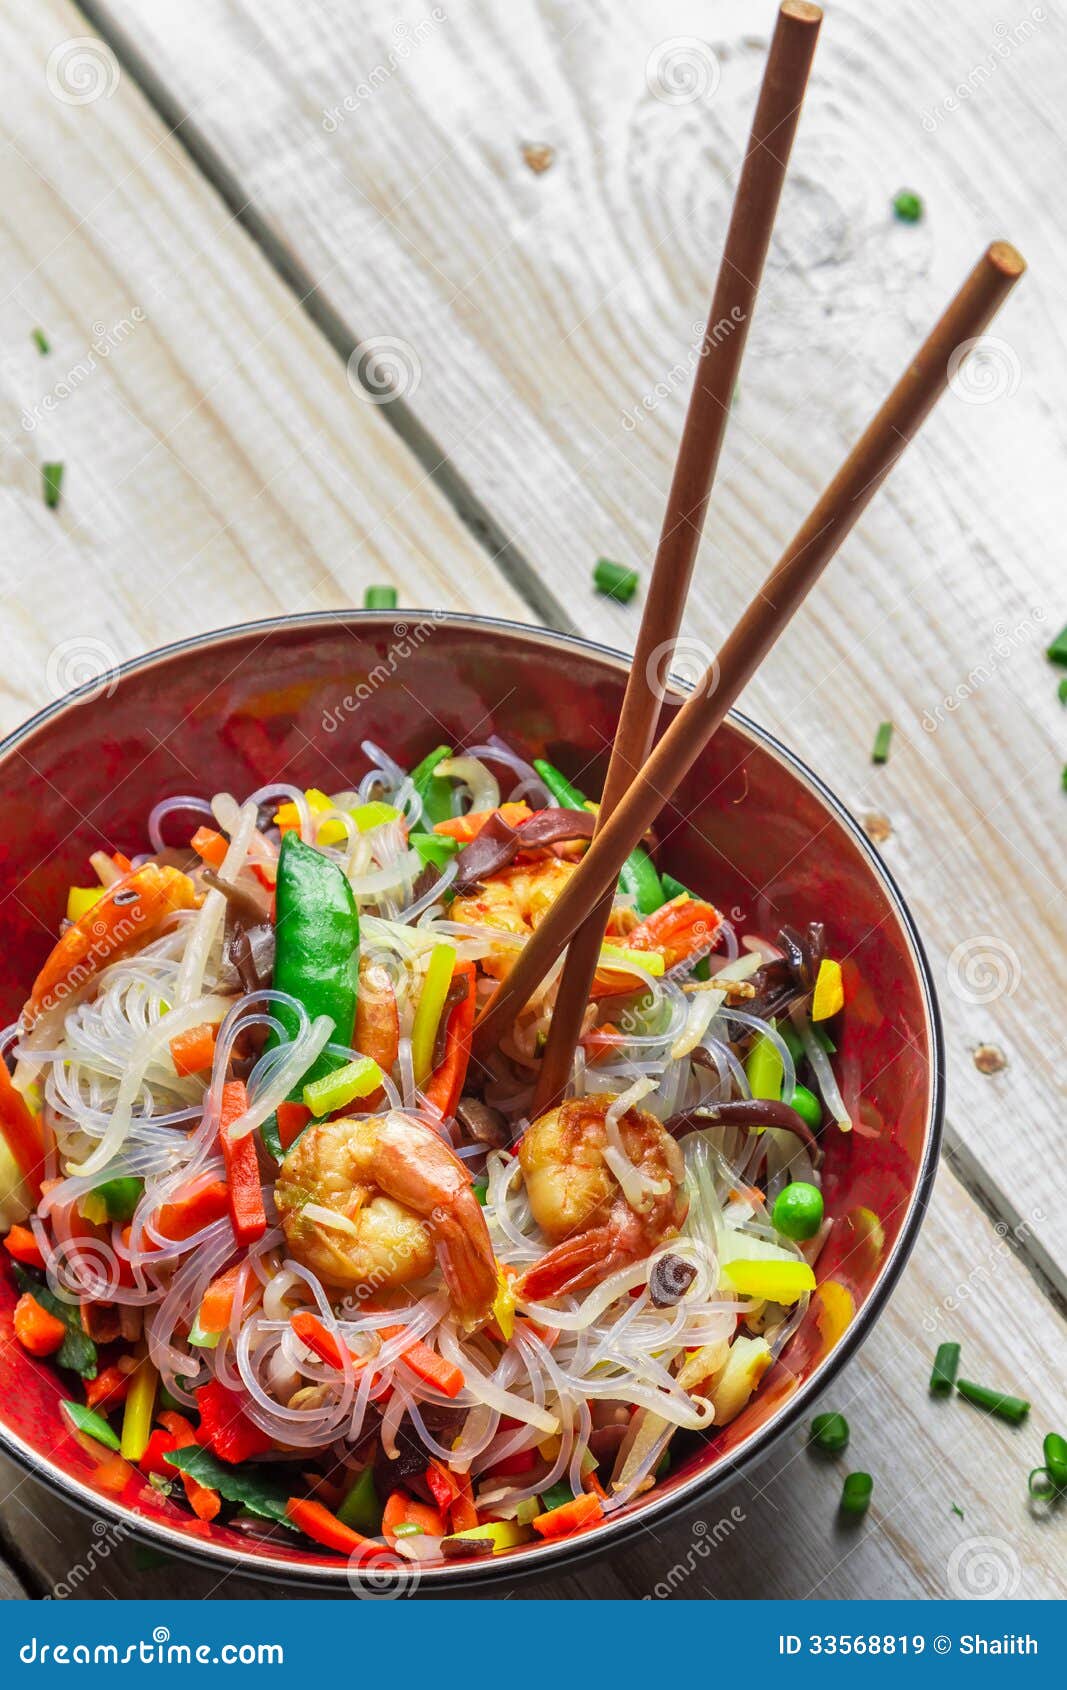 Chinese vegetables with pasta and shrimp on old wooden table